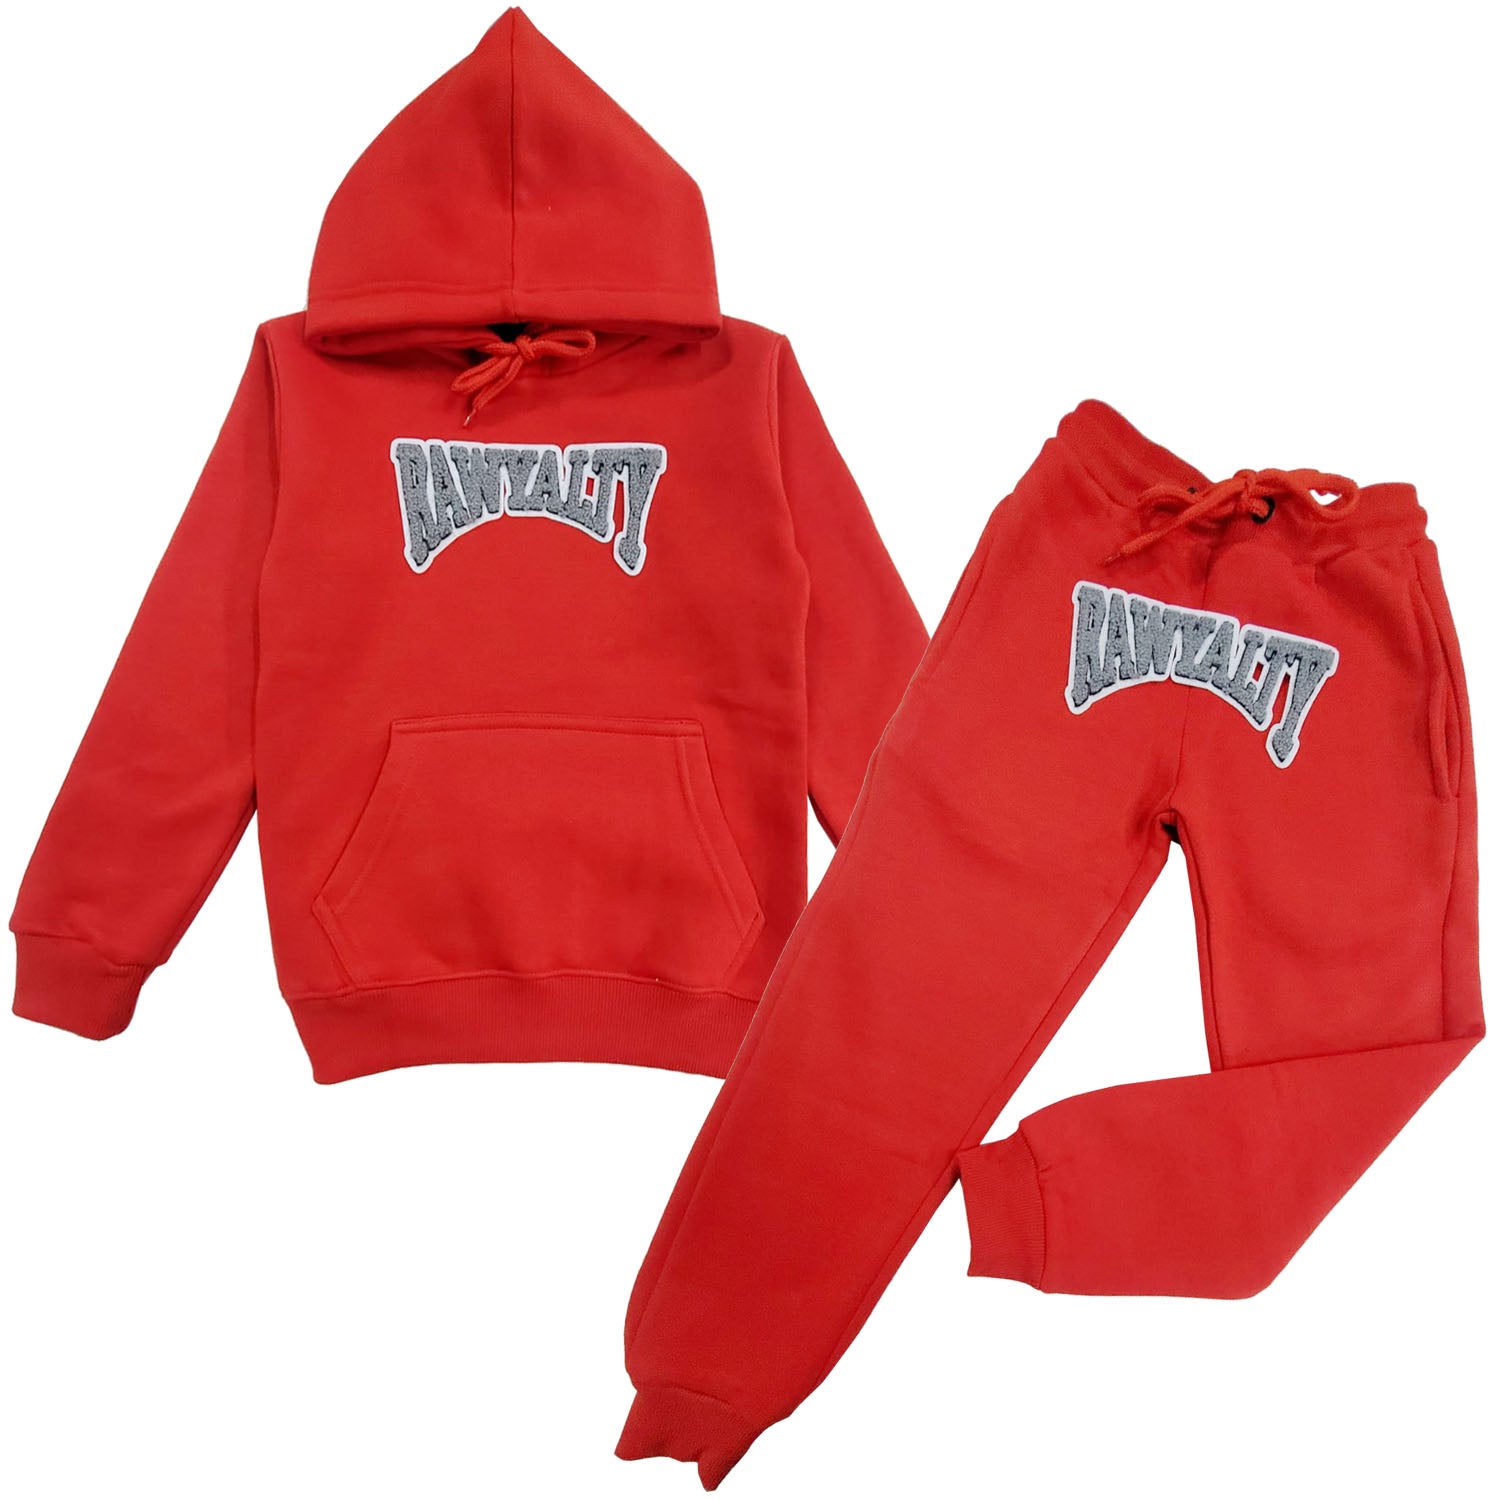 Kids Rawyalty Grey Chenille Hoodie and Jogger Set - Rawyalty Clothing